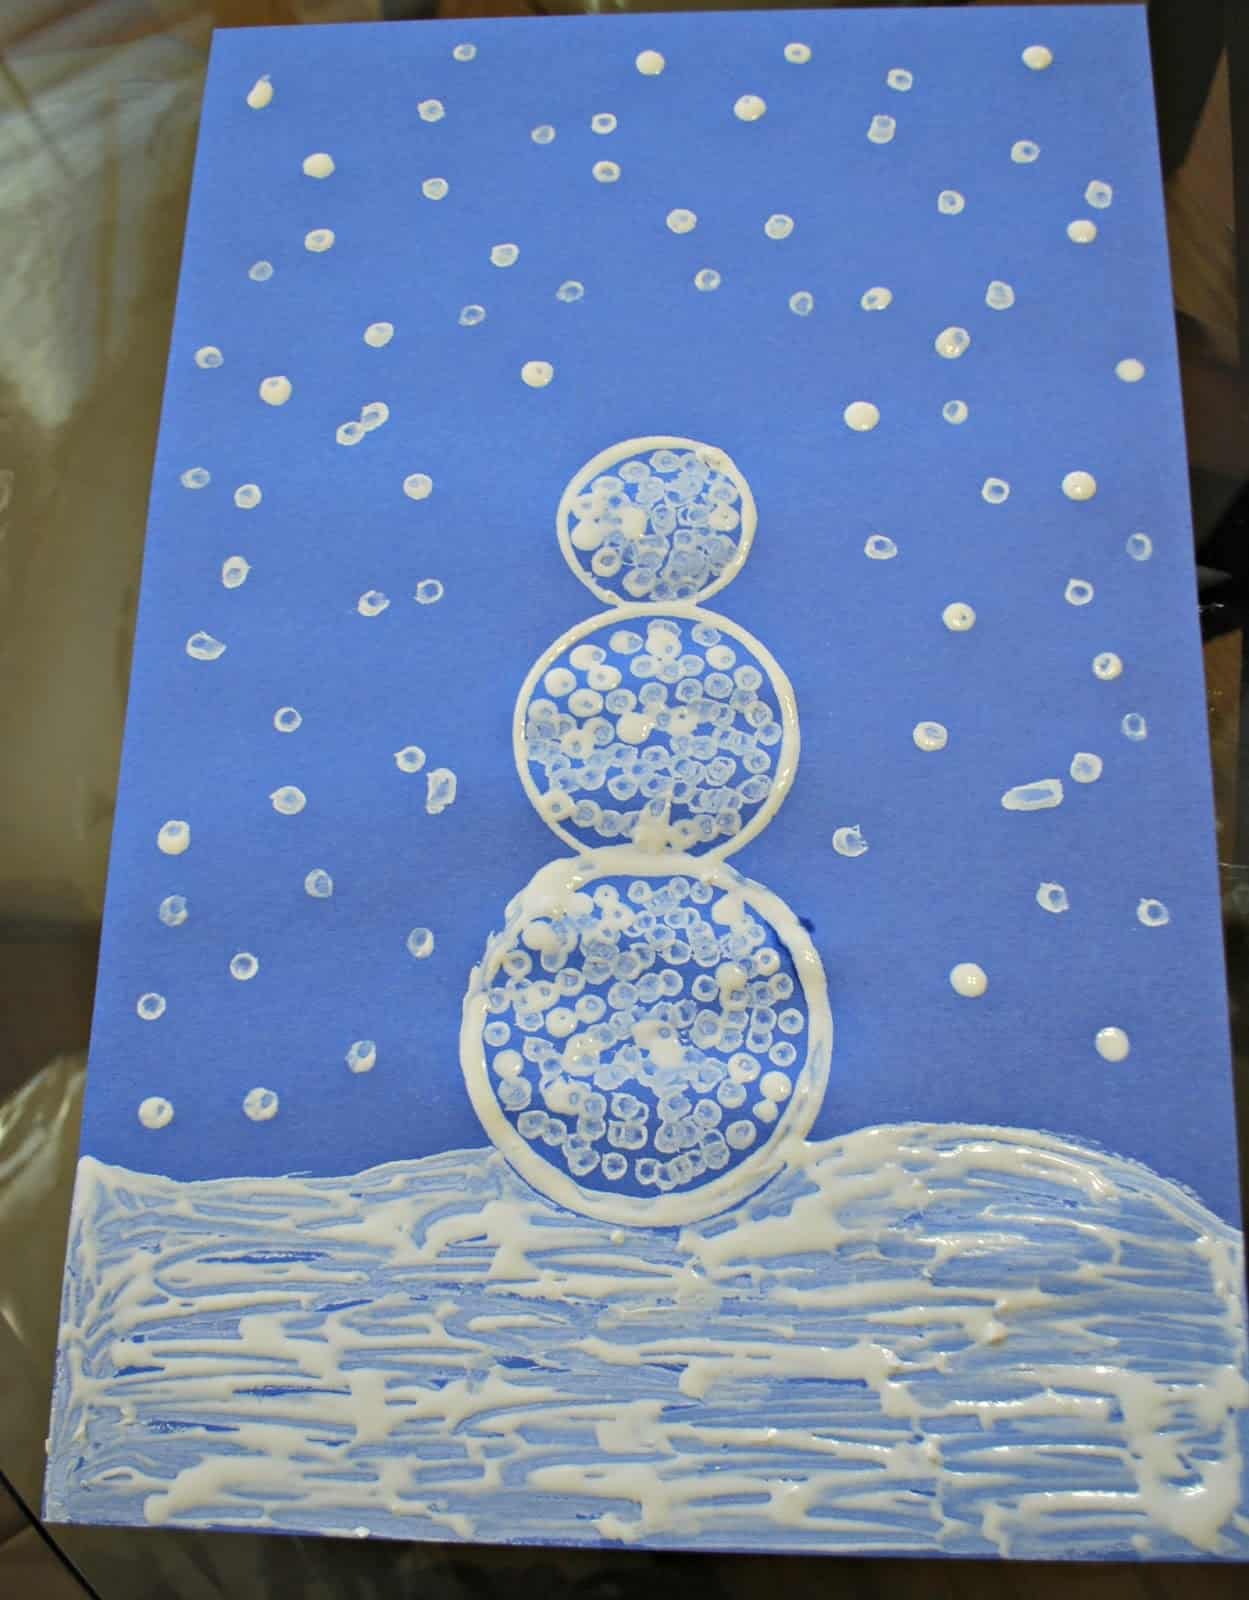 Painting a snowman on blue paper